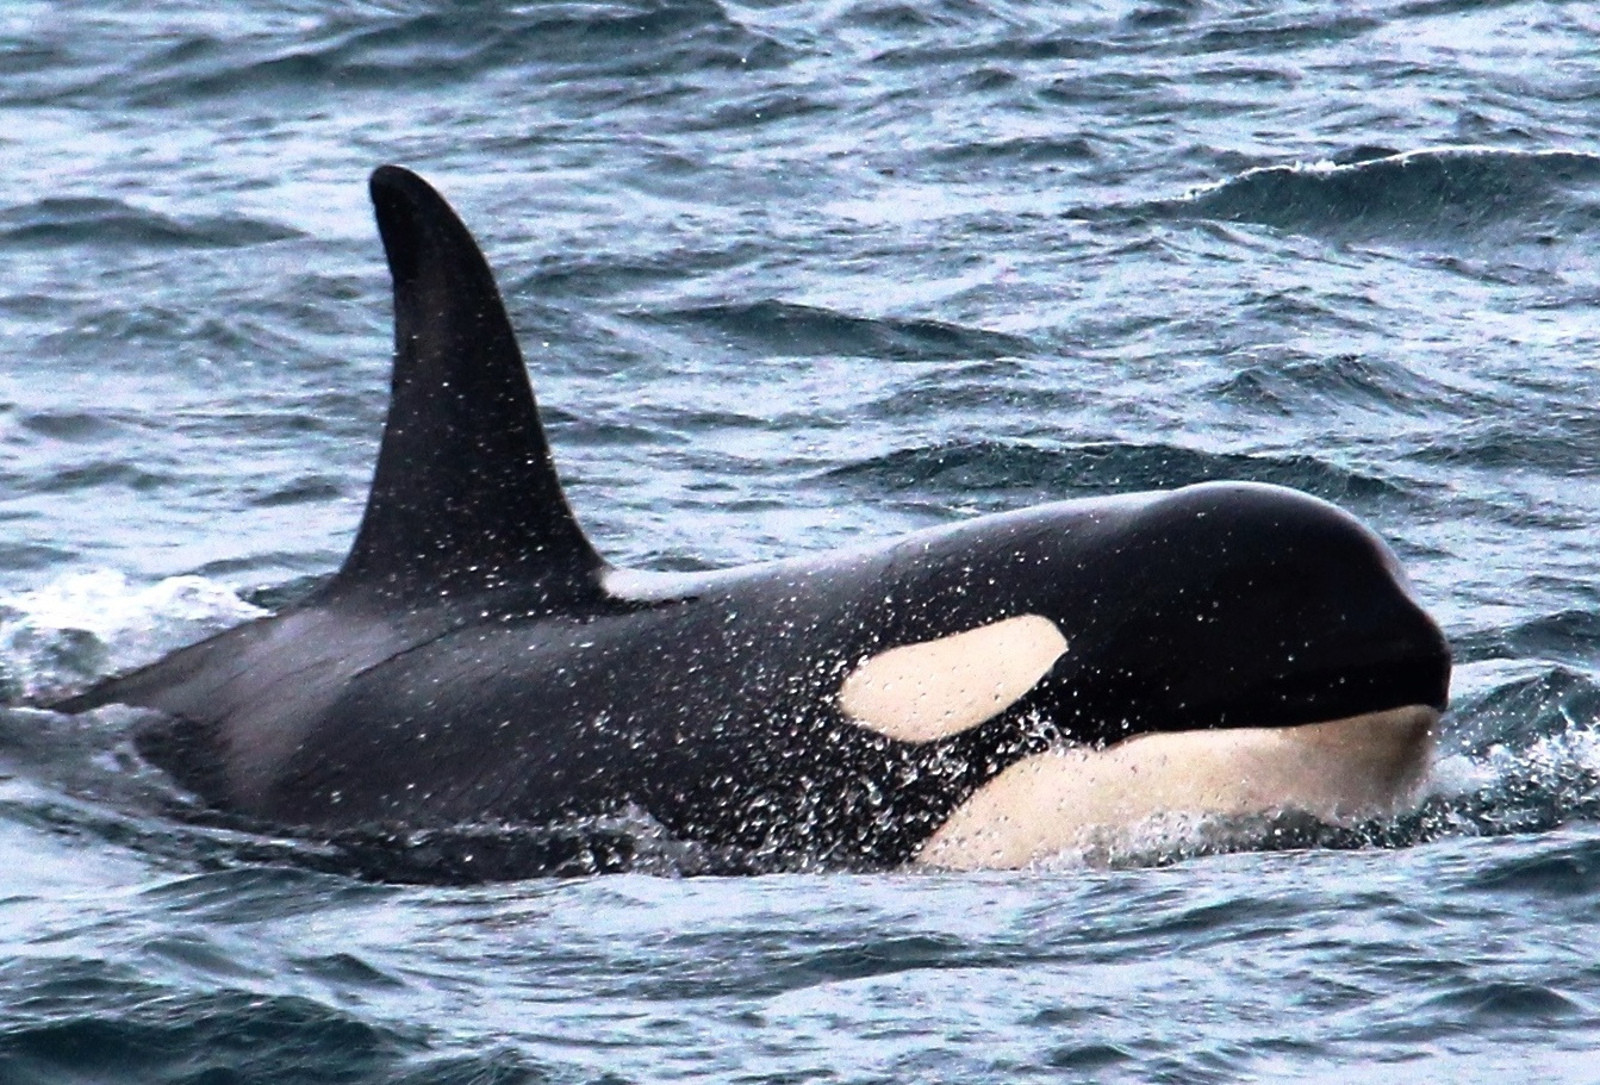 A Personal Reflection On Encounters with Orca